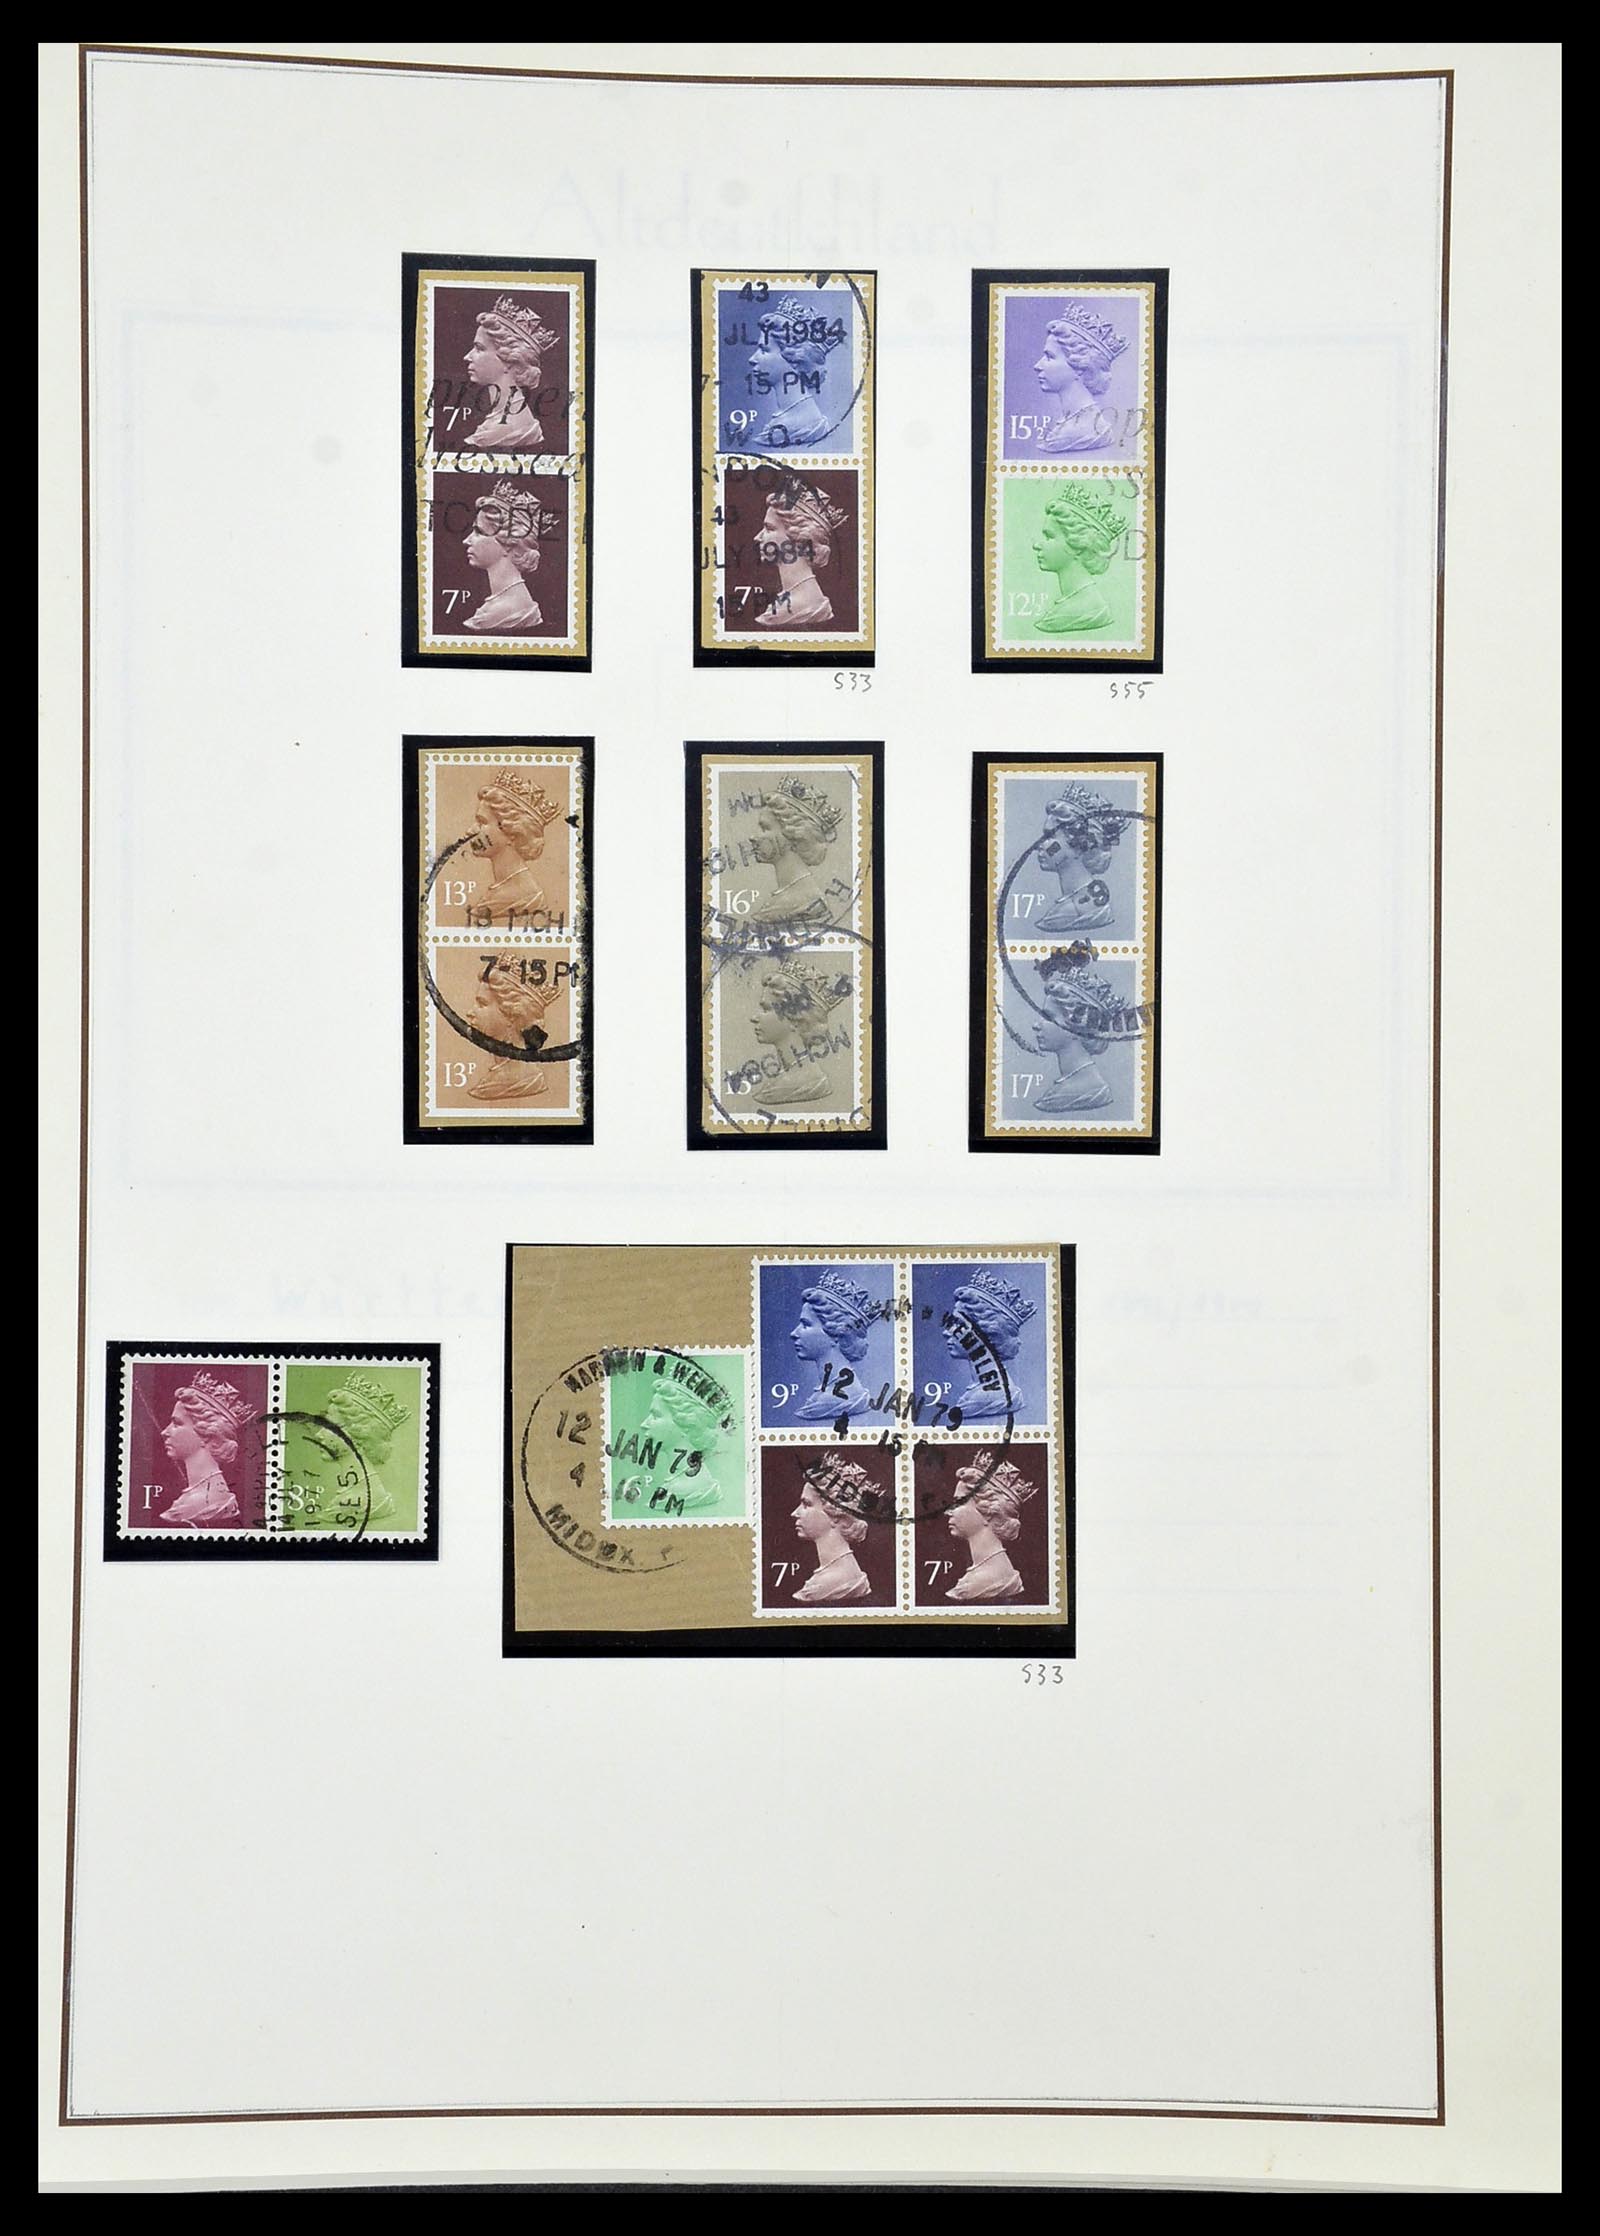 34221 197 - Stamp collection 34221 Great Britain Machins/castles 1971-2005.